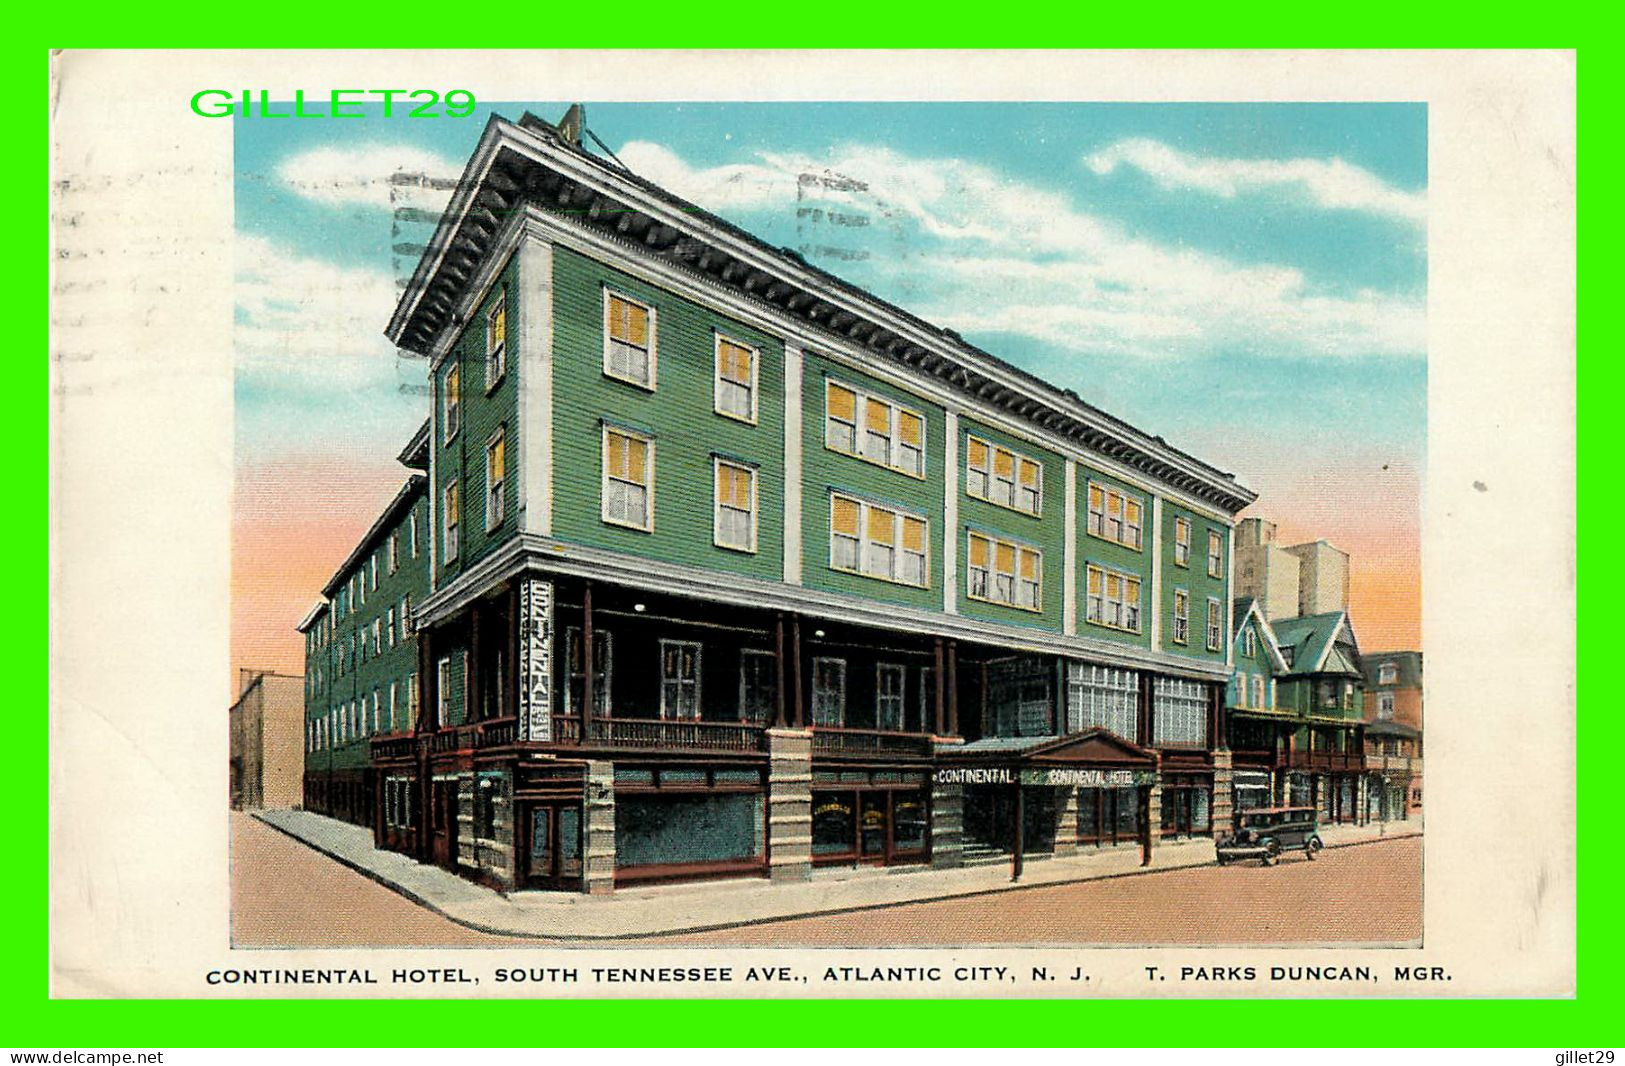 ATLANTIC CITY, NJ - CONTINETAL HOTEL, ROUTH TENNESSEE AVE. - T. PARKS DUNCAN, MGR. - TRAVEL IN 1934 - KROPP CO - - Atlantic City